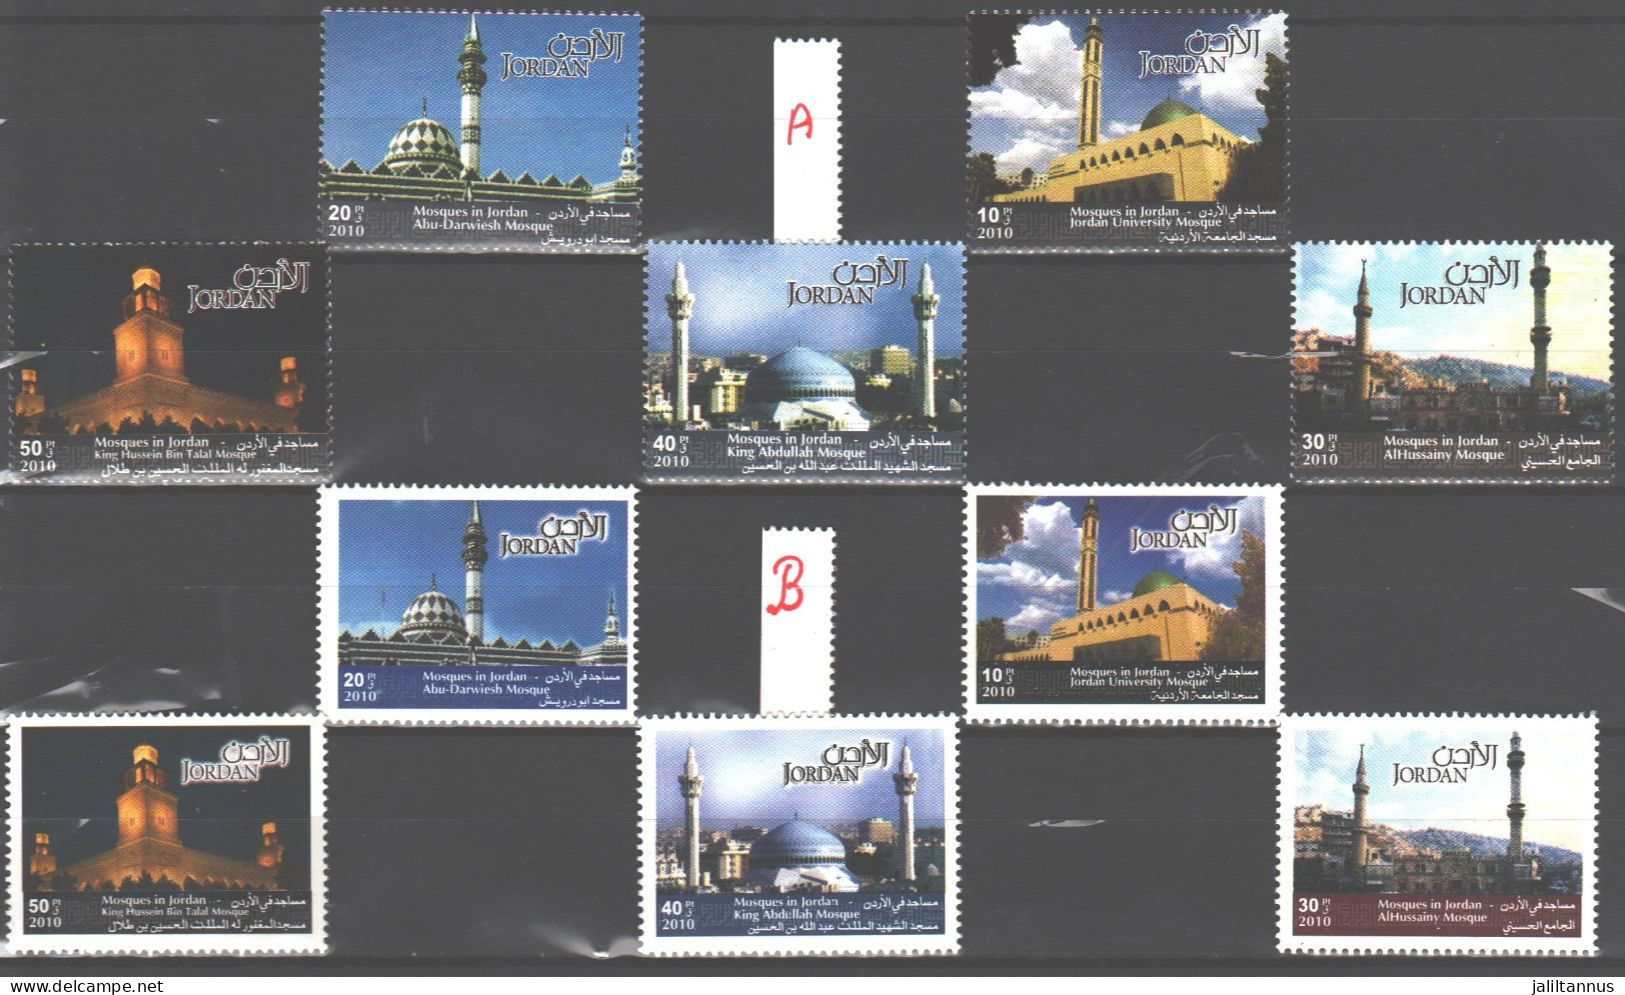 Jordan - Set 2010 Mosque Group A Common + Group B Not In Circulation Error There Is A White Frame - Jordanien